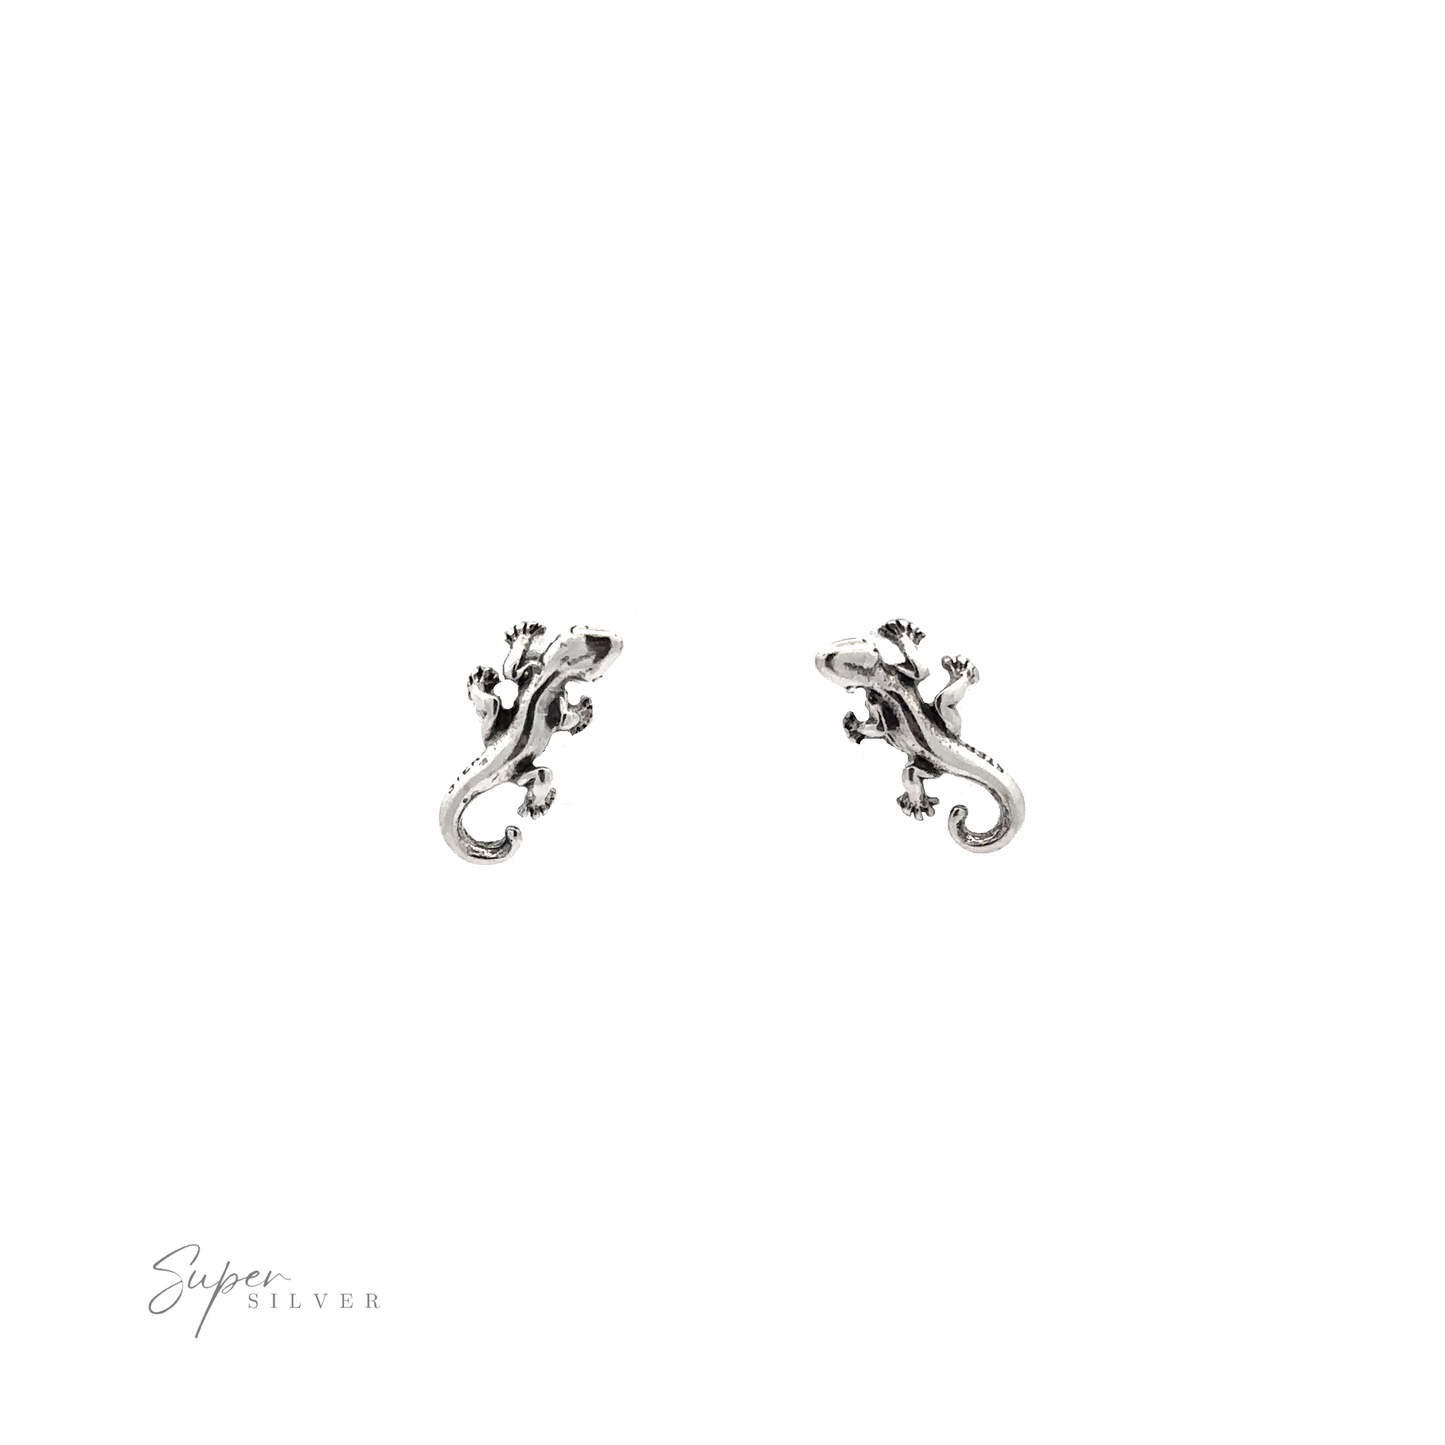 
                  
                    These Lizard Studs feature minimal detailing, crafted in silver for a stunning contrast against the white background.
                  
                